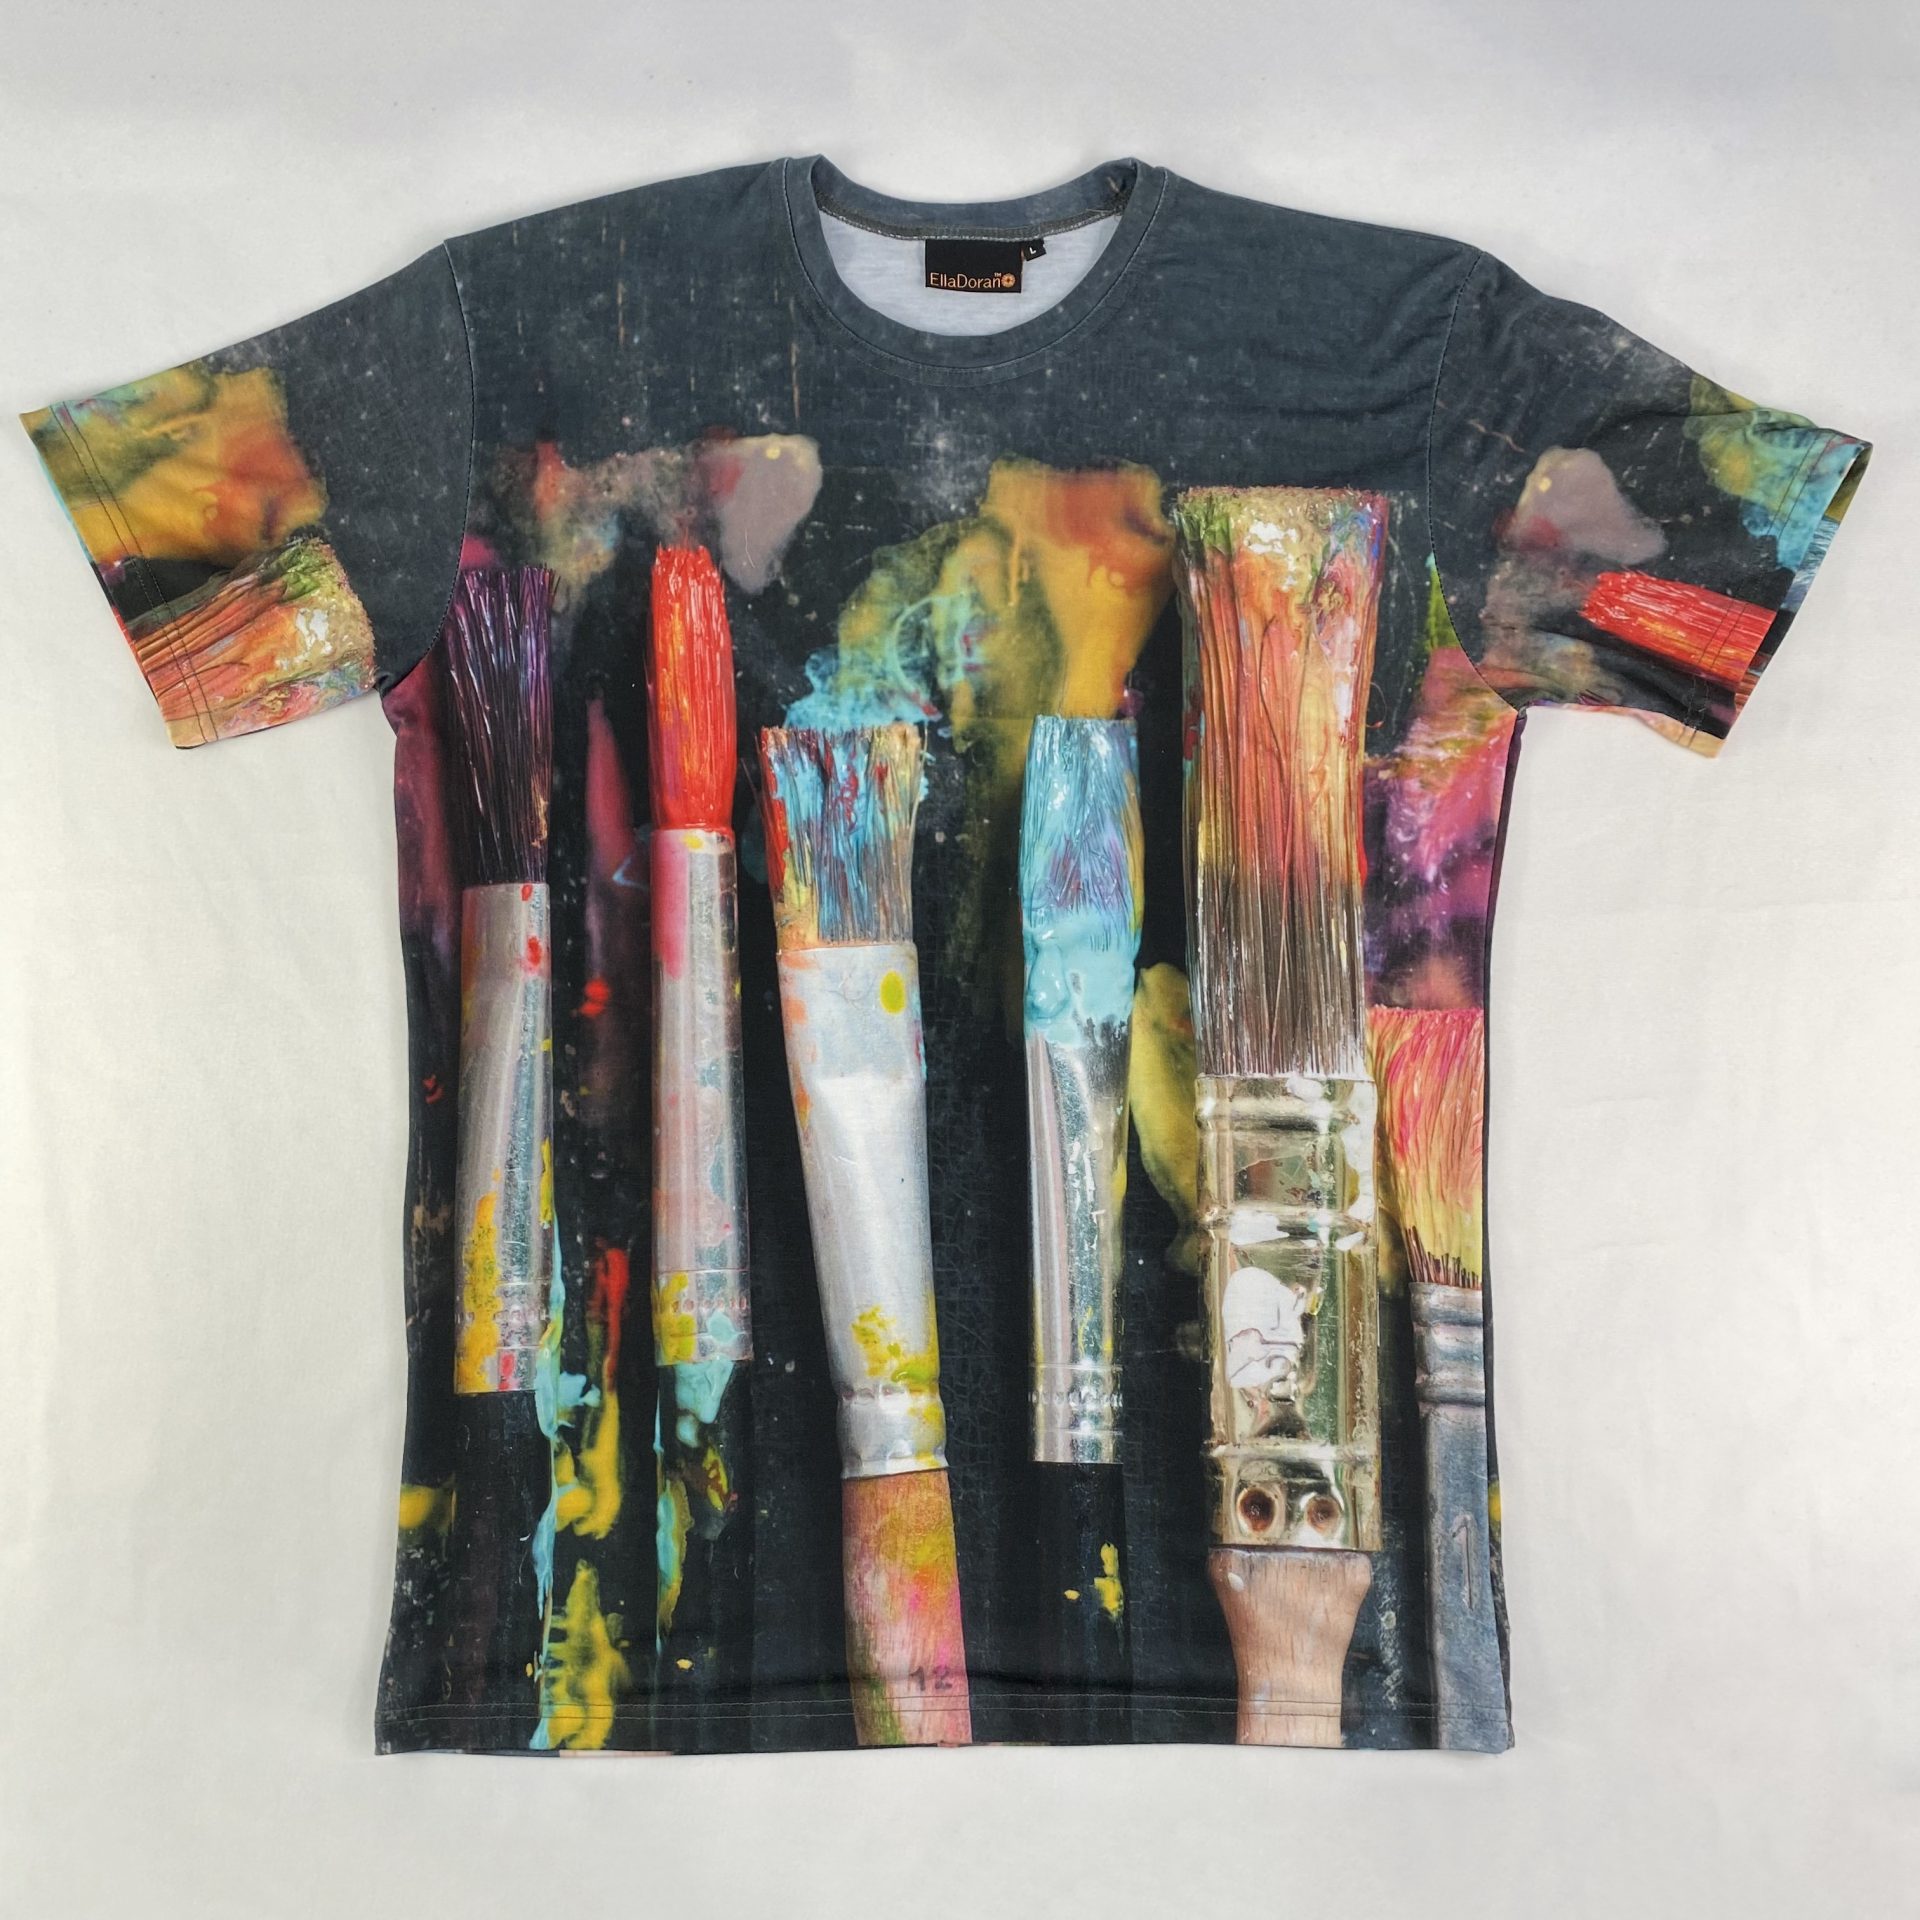 Ella Doran for Tate Dye Sublimation t-shirt by Paul Bristow's UK made t-shirt